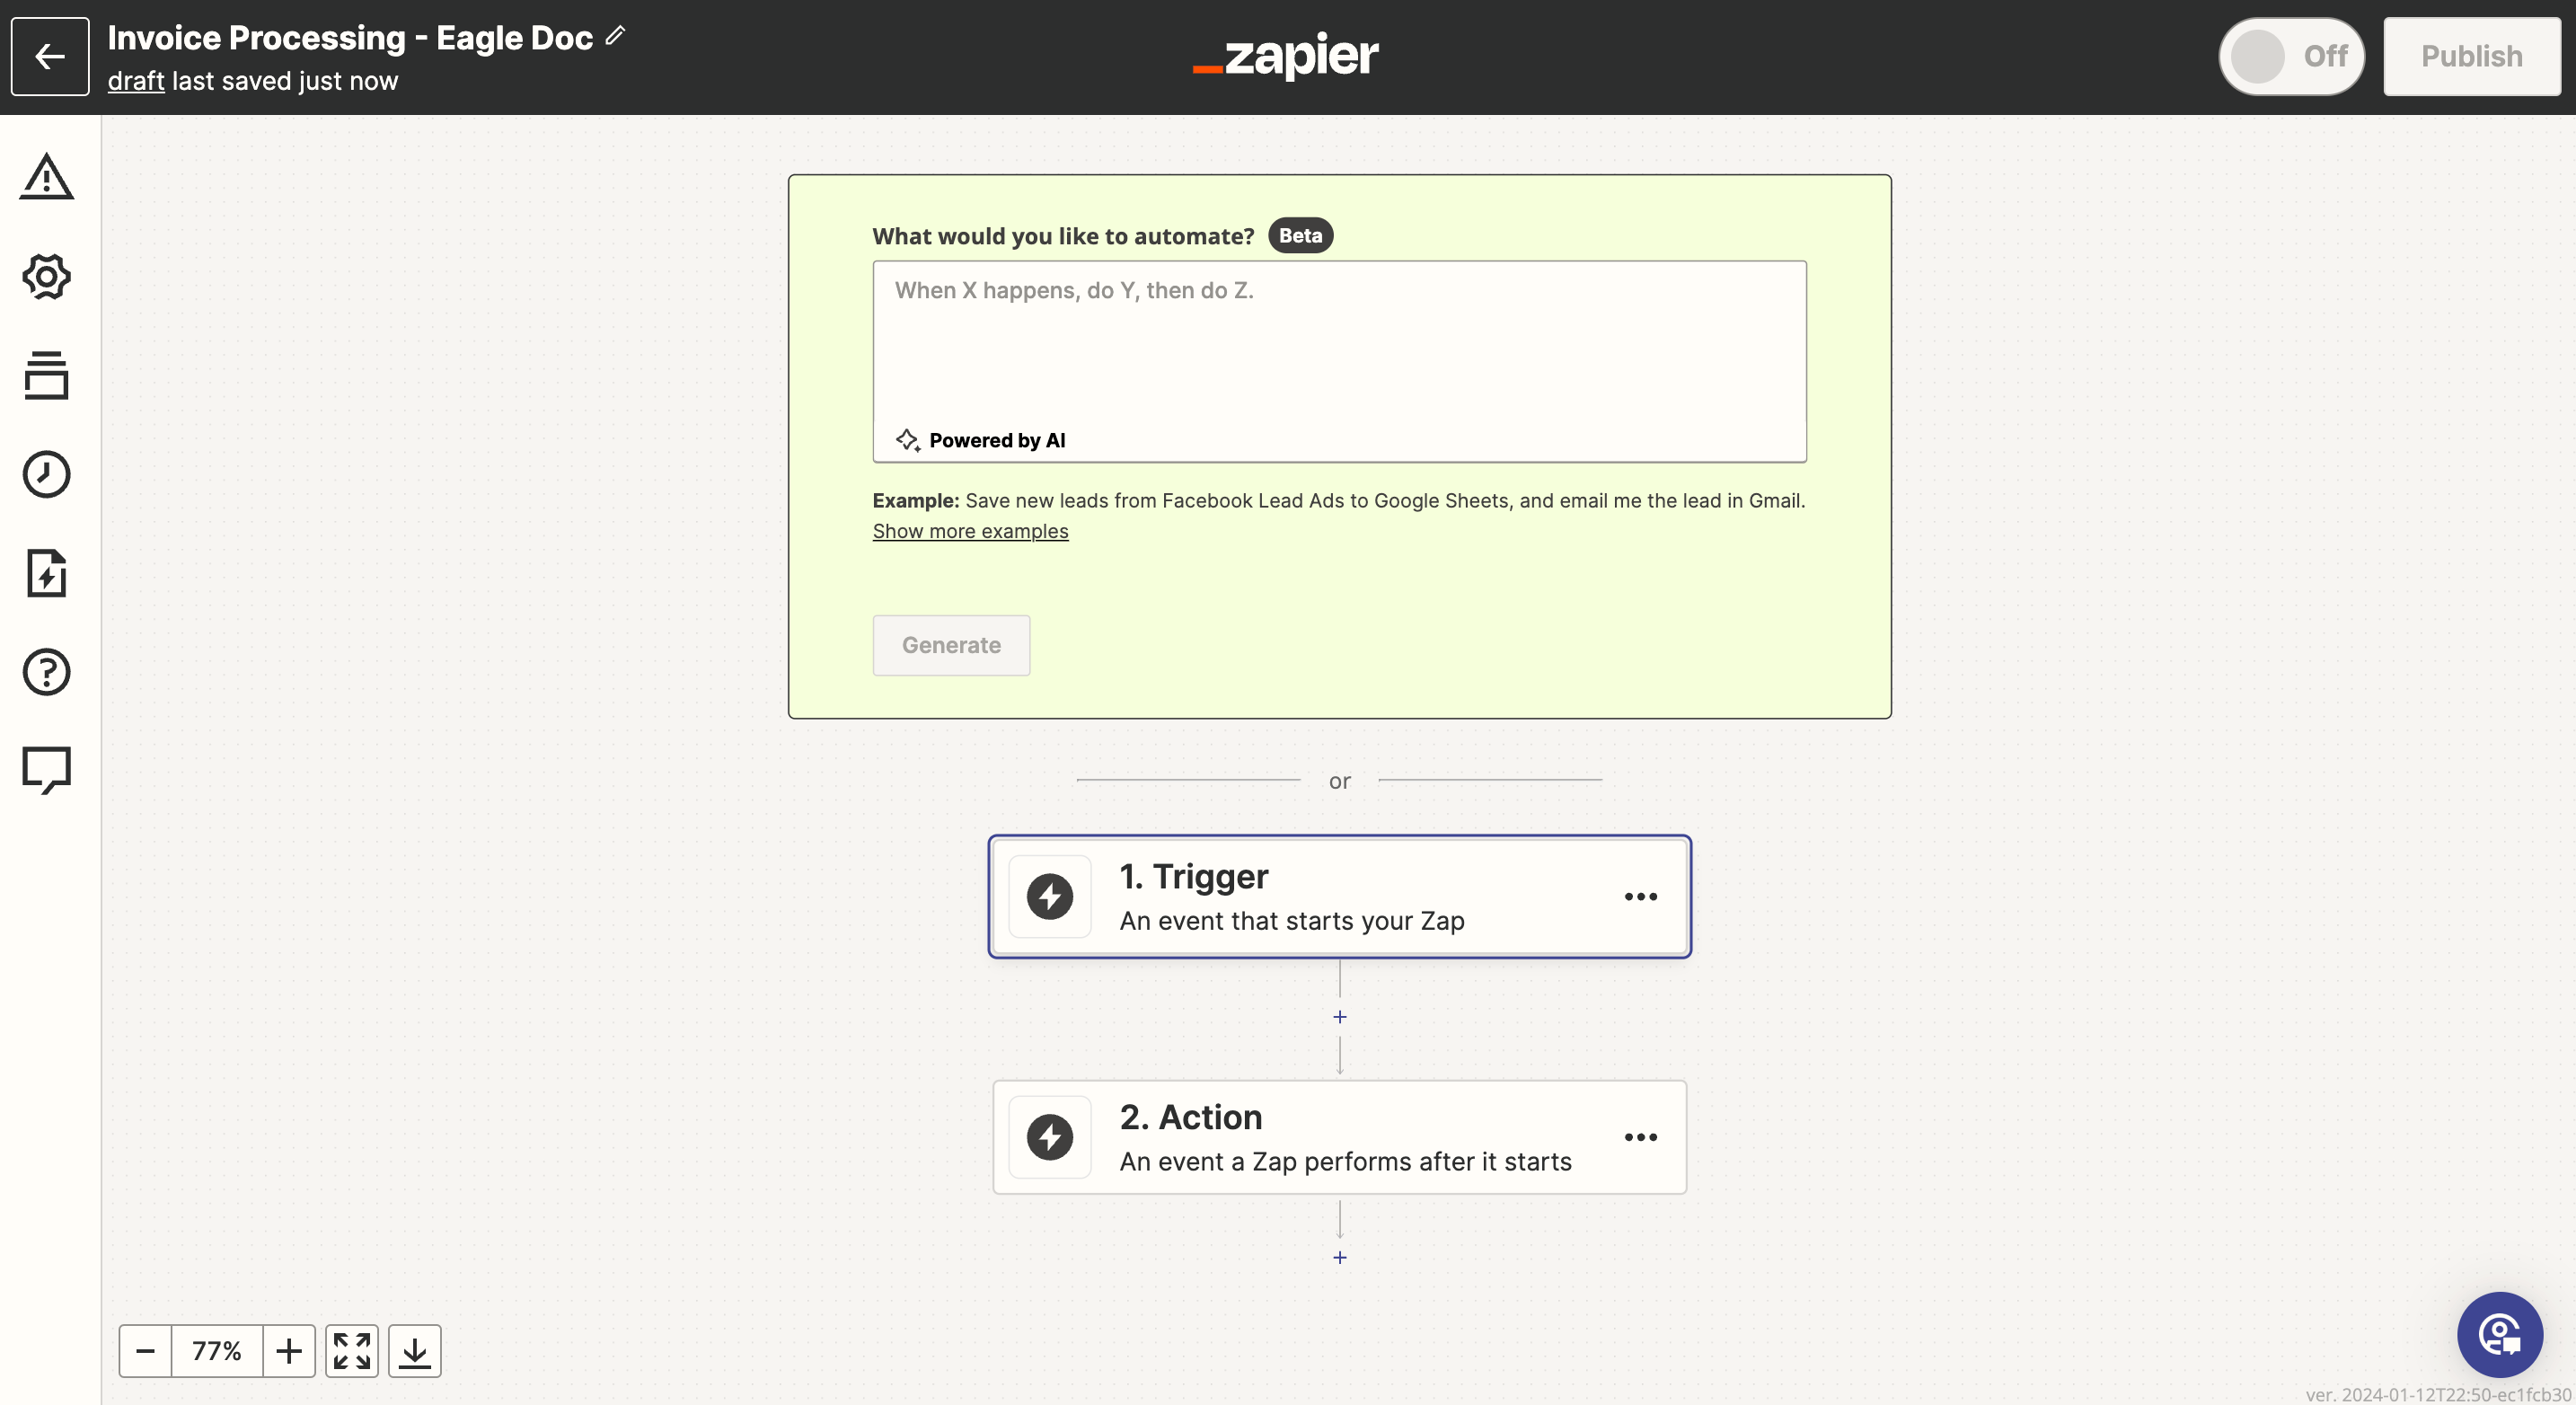 named Zapier workflow prepared for invoice processing